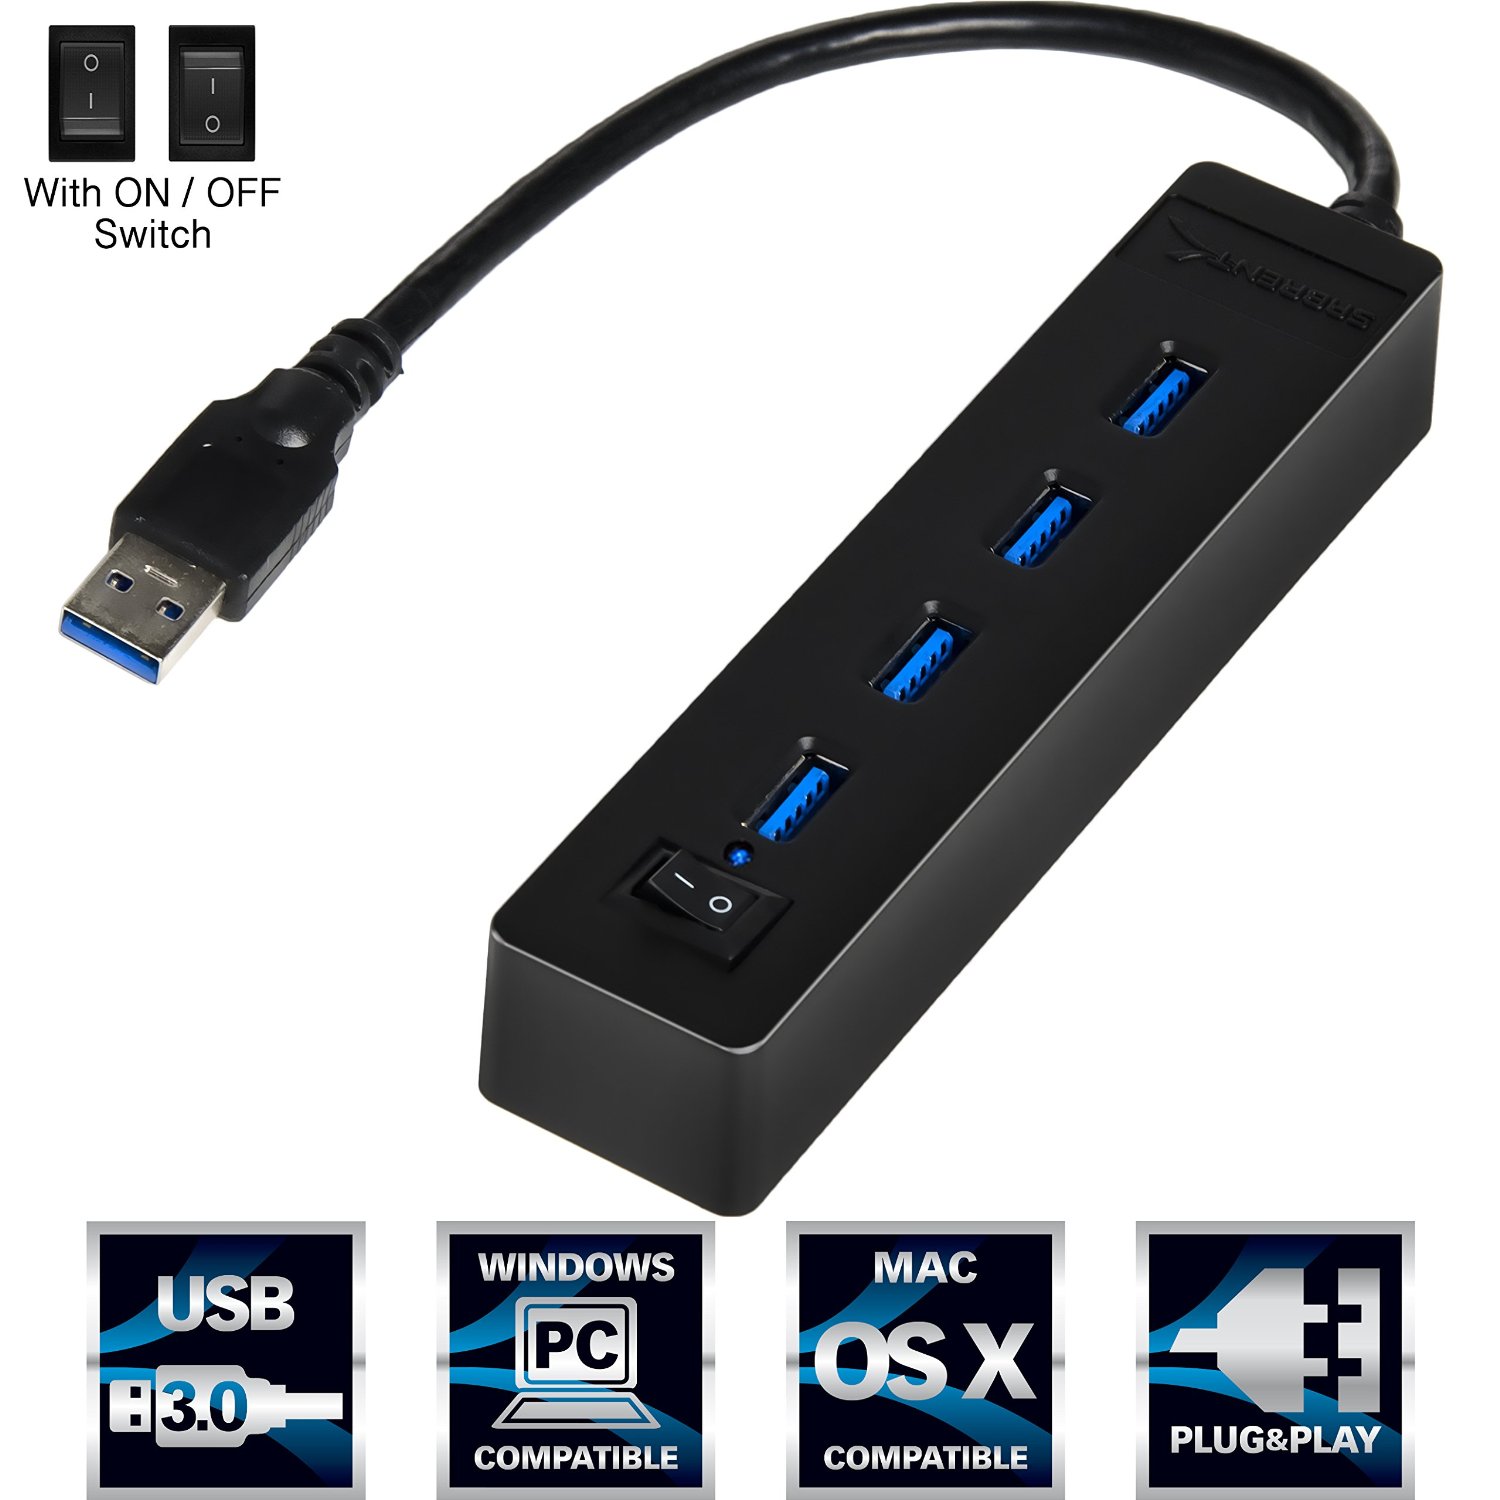 Sabrent 4 Port Portable USB 3.0 Hub with Power Switch for Ultra Book, MacBook Air, Windows 8 Tablet PC - Black (HB-U3P4)